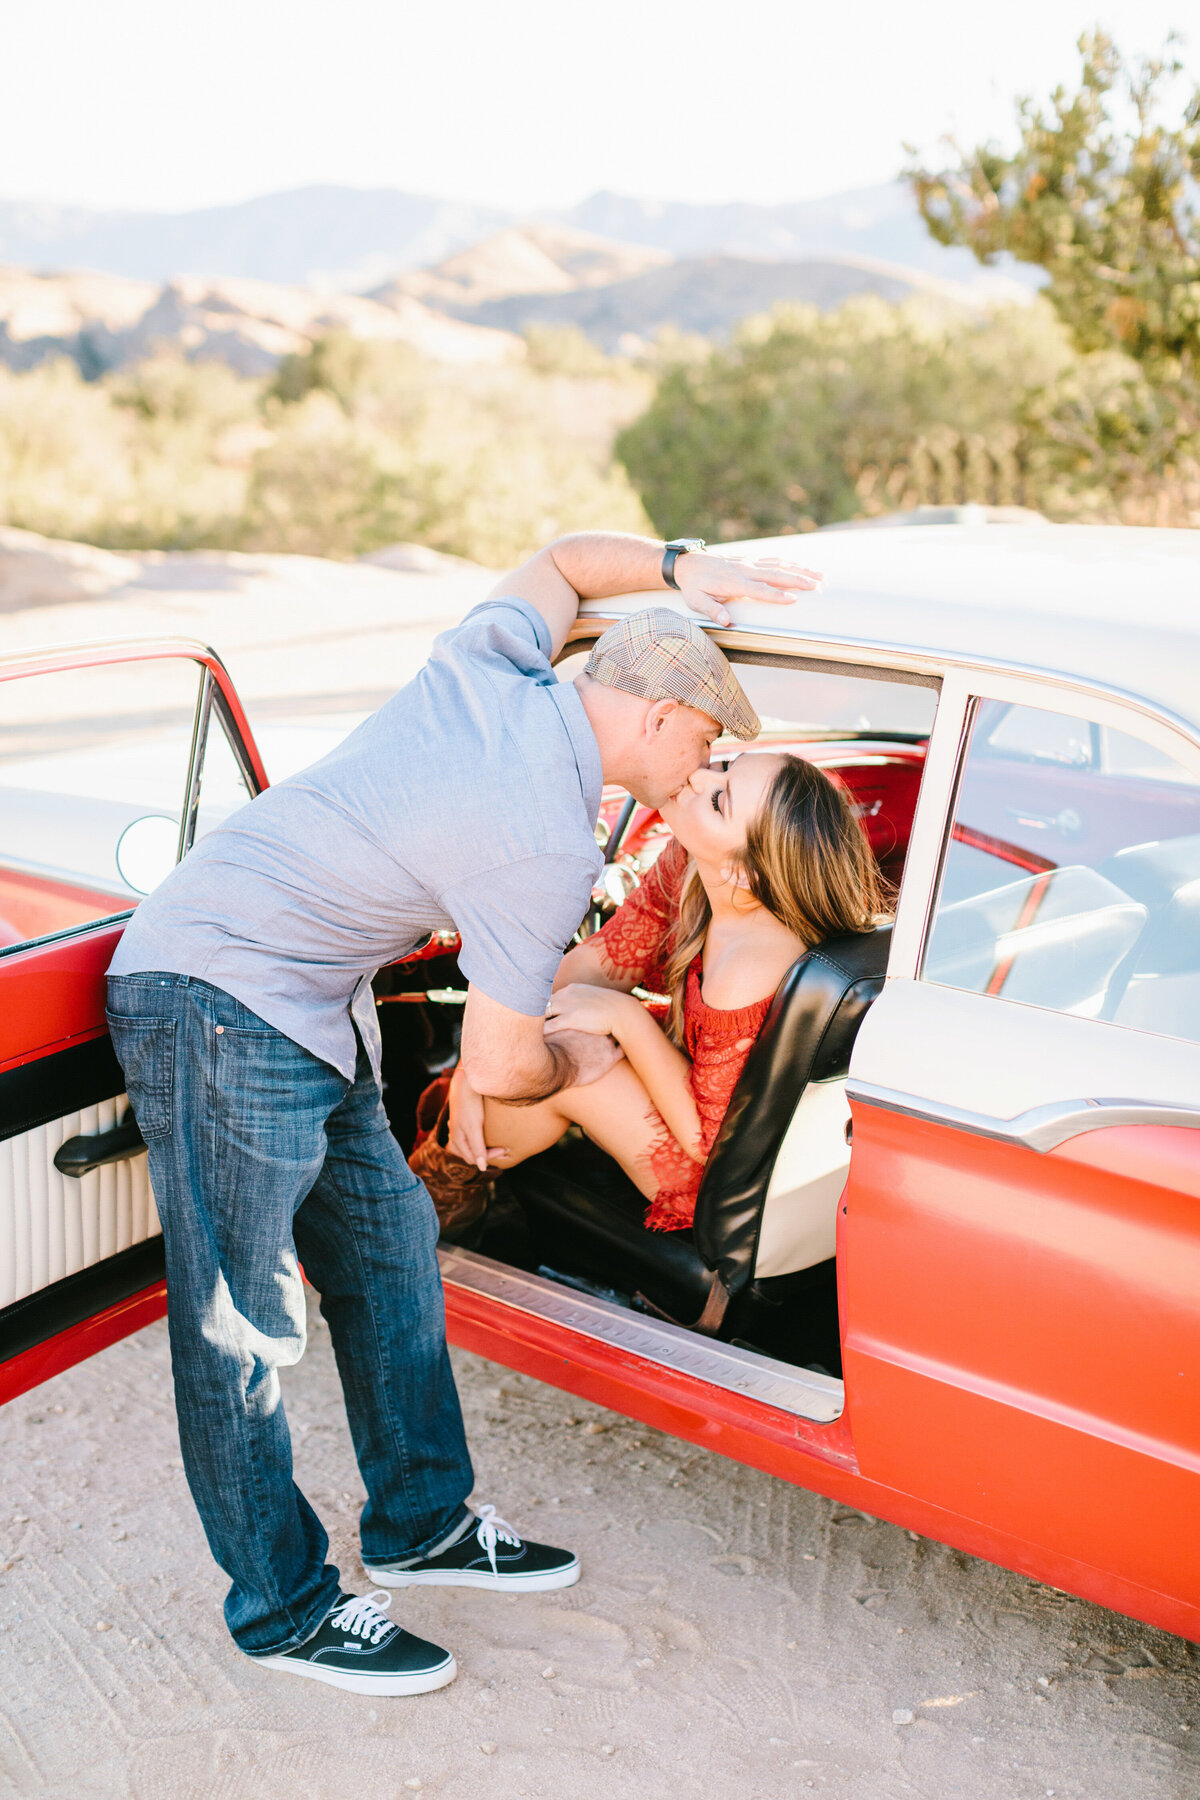 Best California and Texas Engagement Photos-Jodee Friday & Co-190